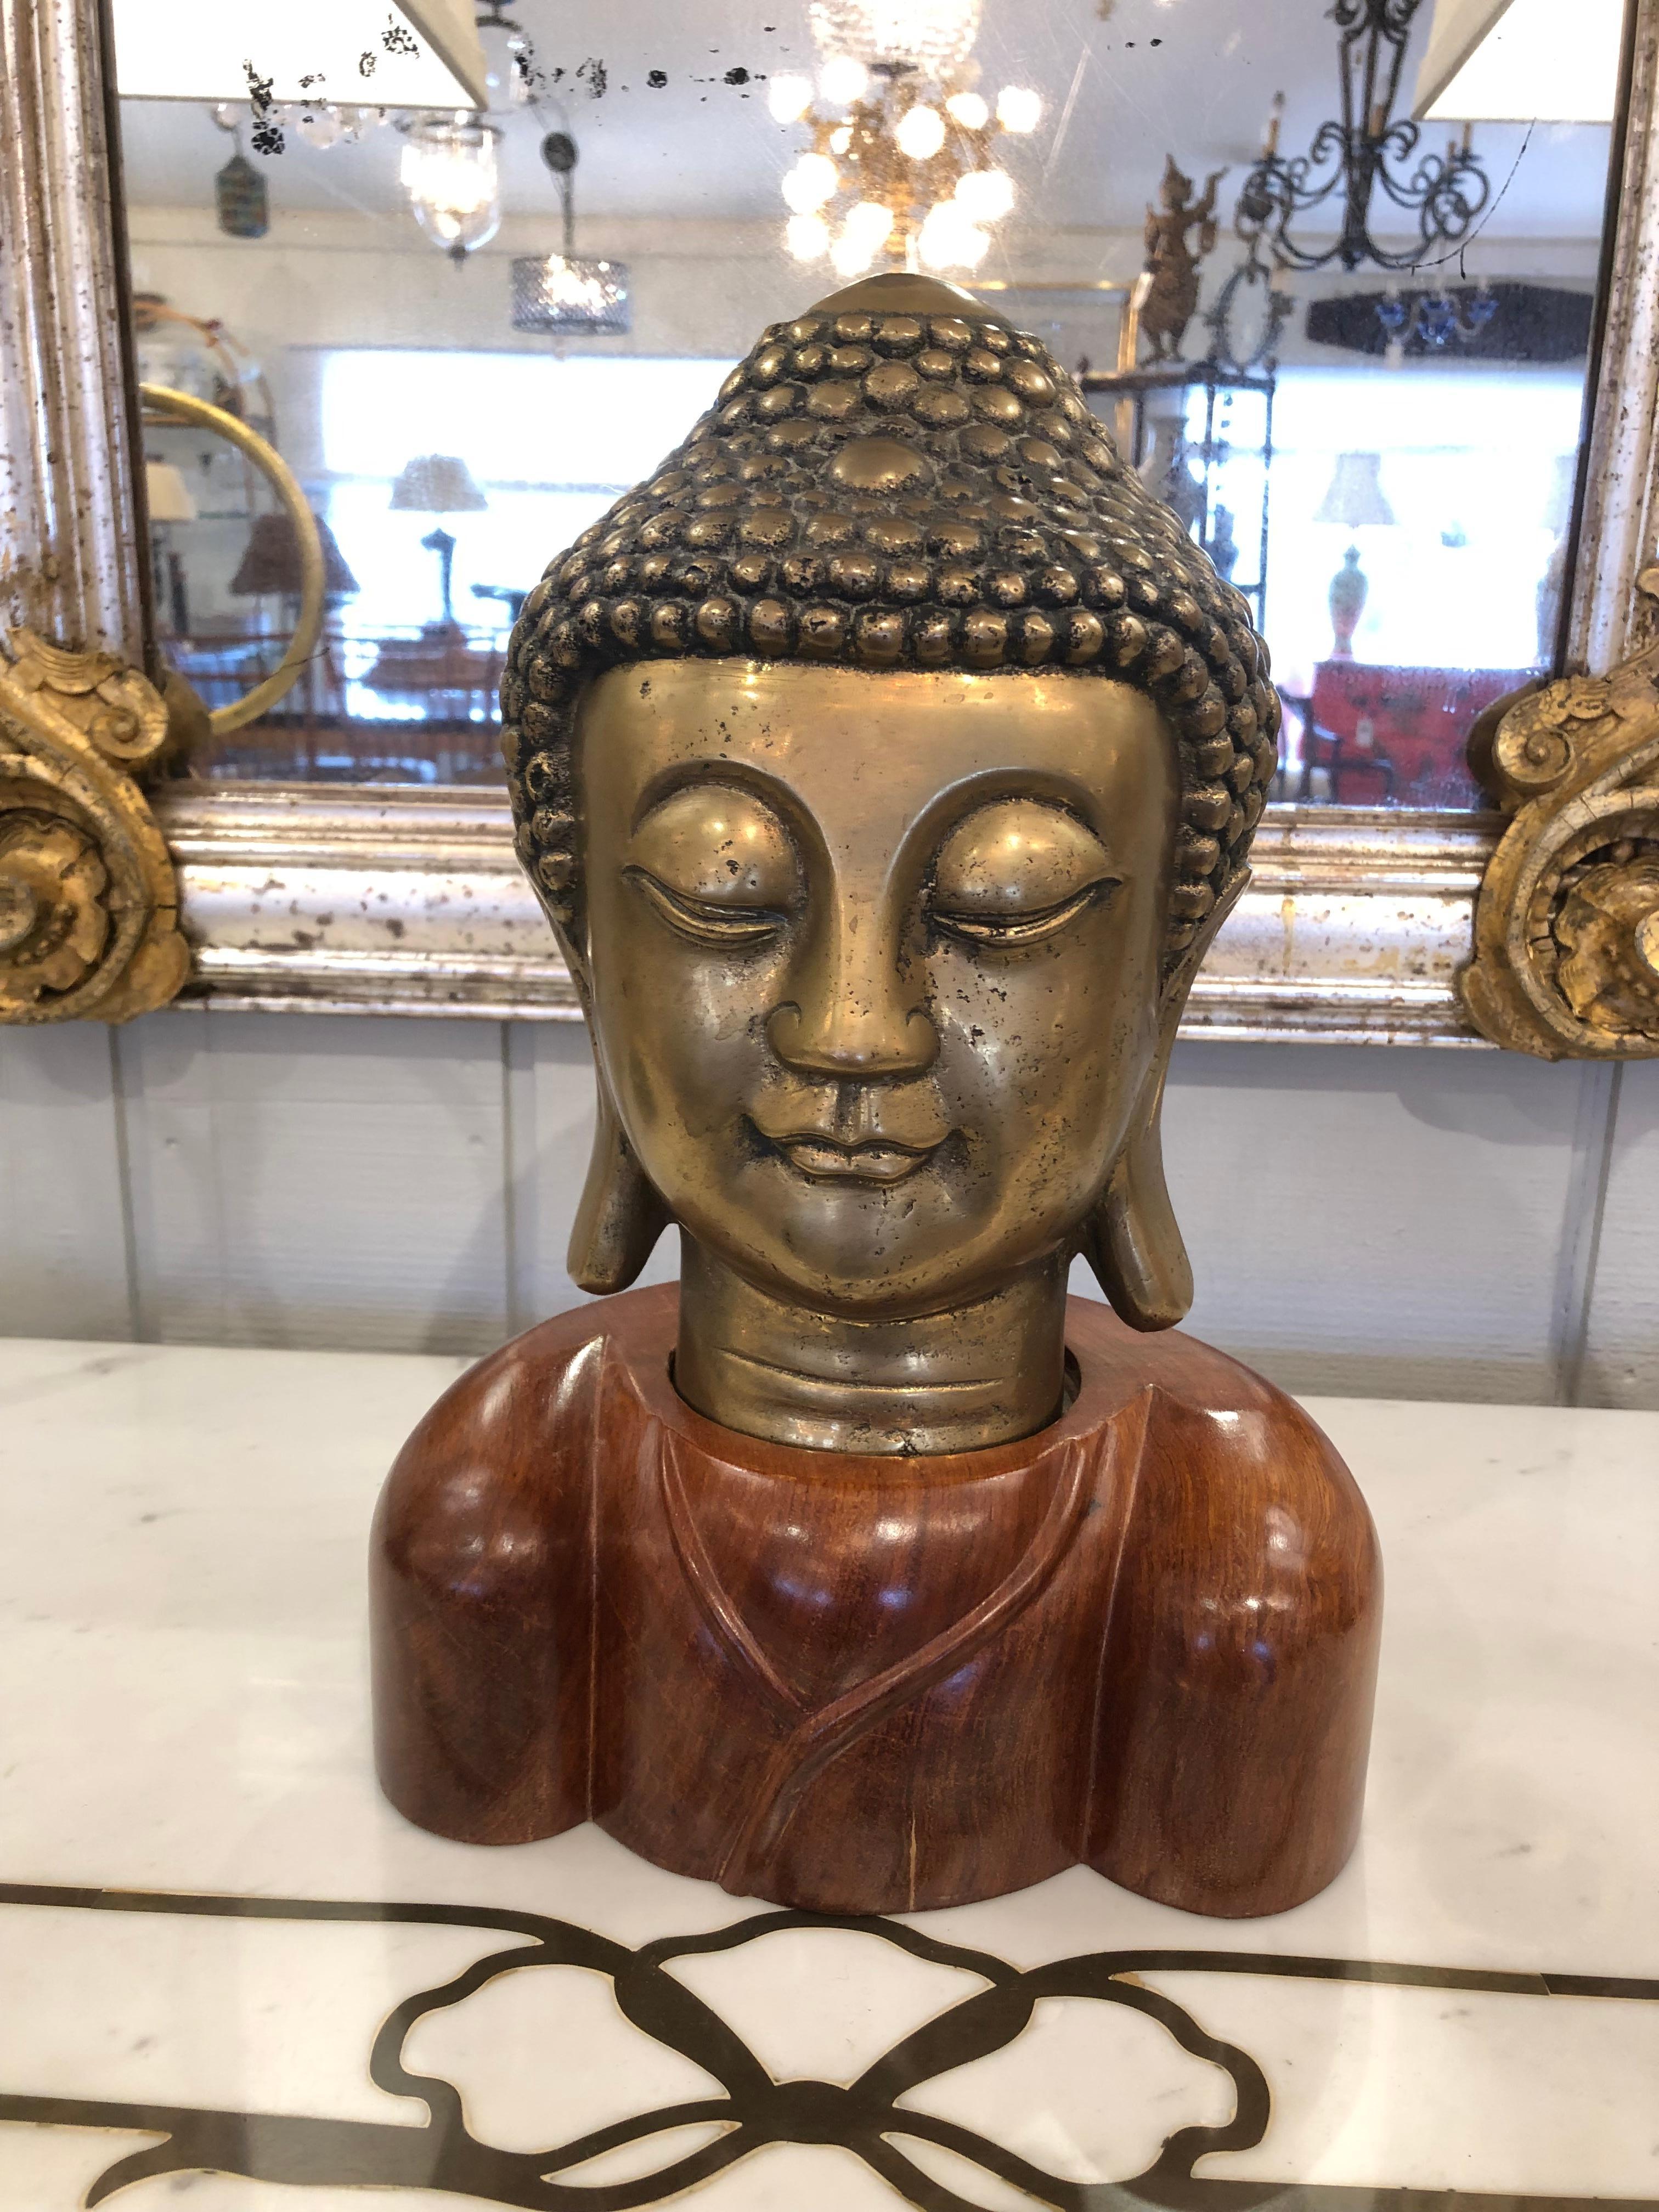 Striking Buddha head having meticulously detailed bronze bust and beautifully grained wooden base.